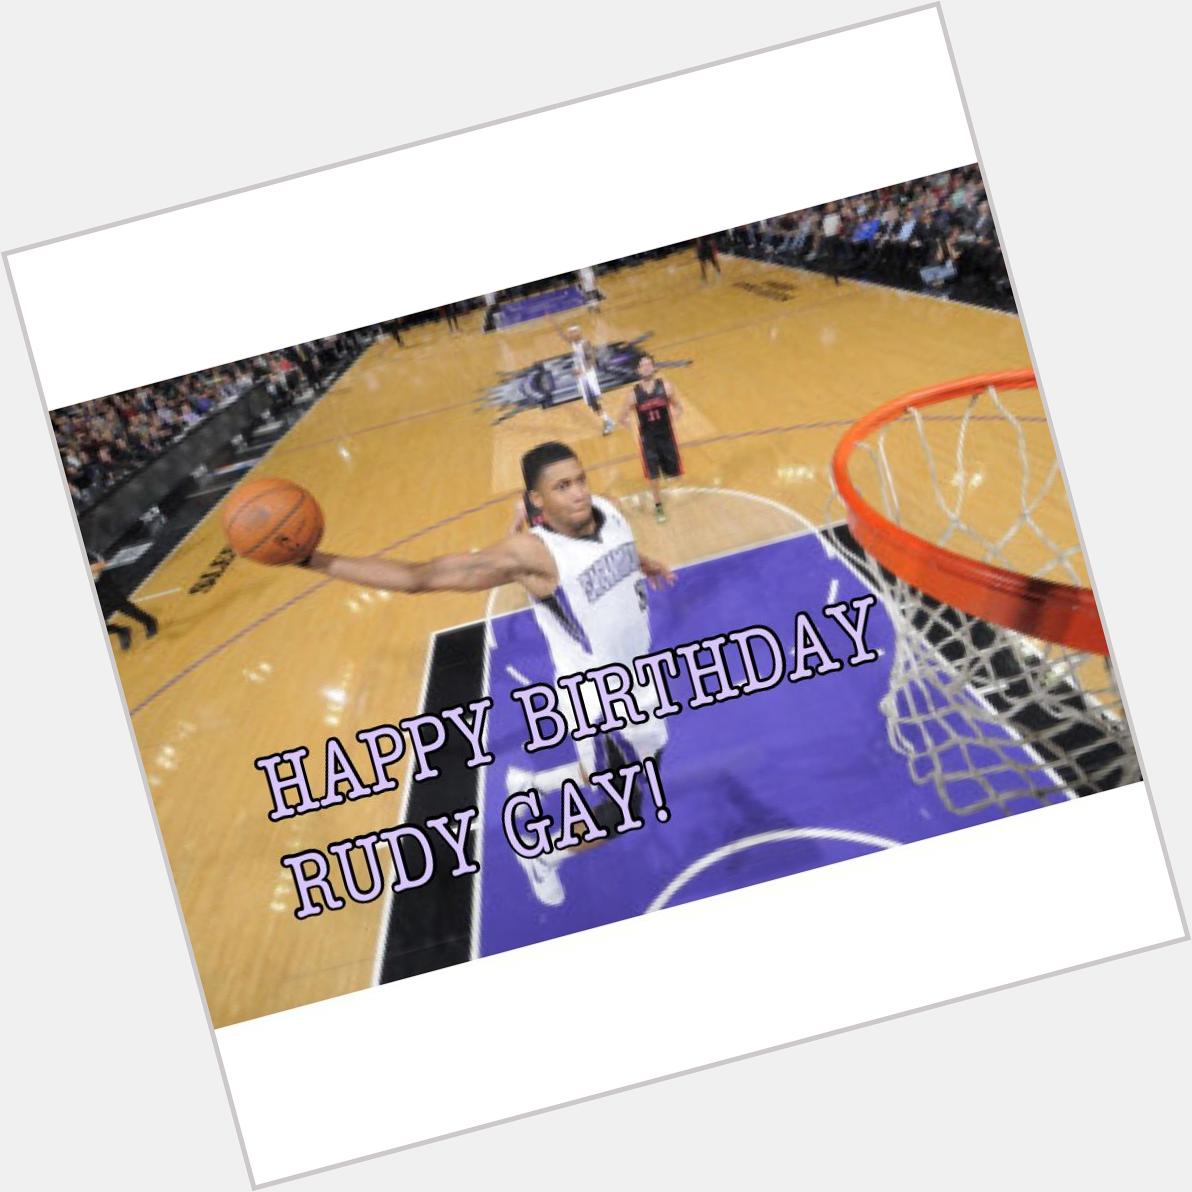 HAPPY BIRTHDAY RUDY GAY!     Live like a King today! 